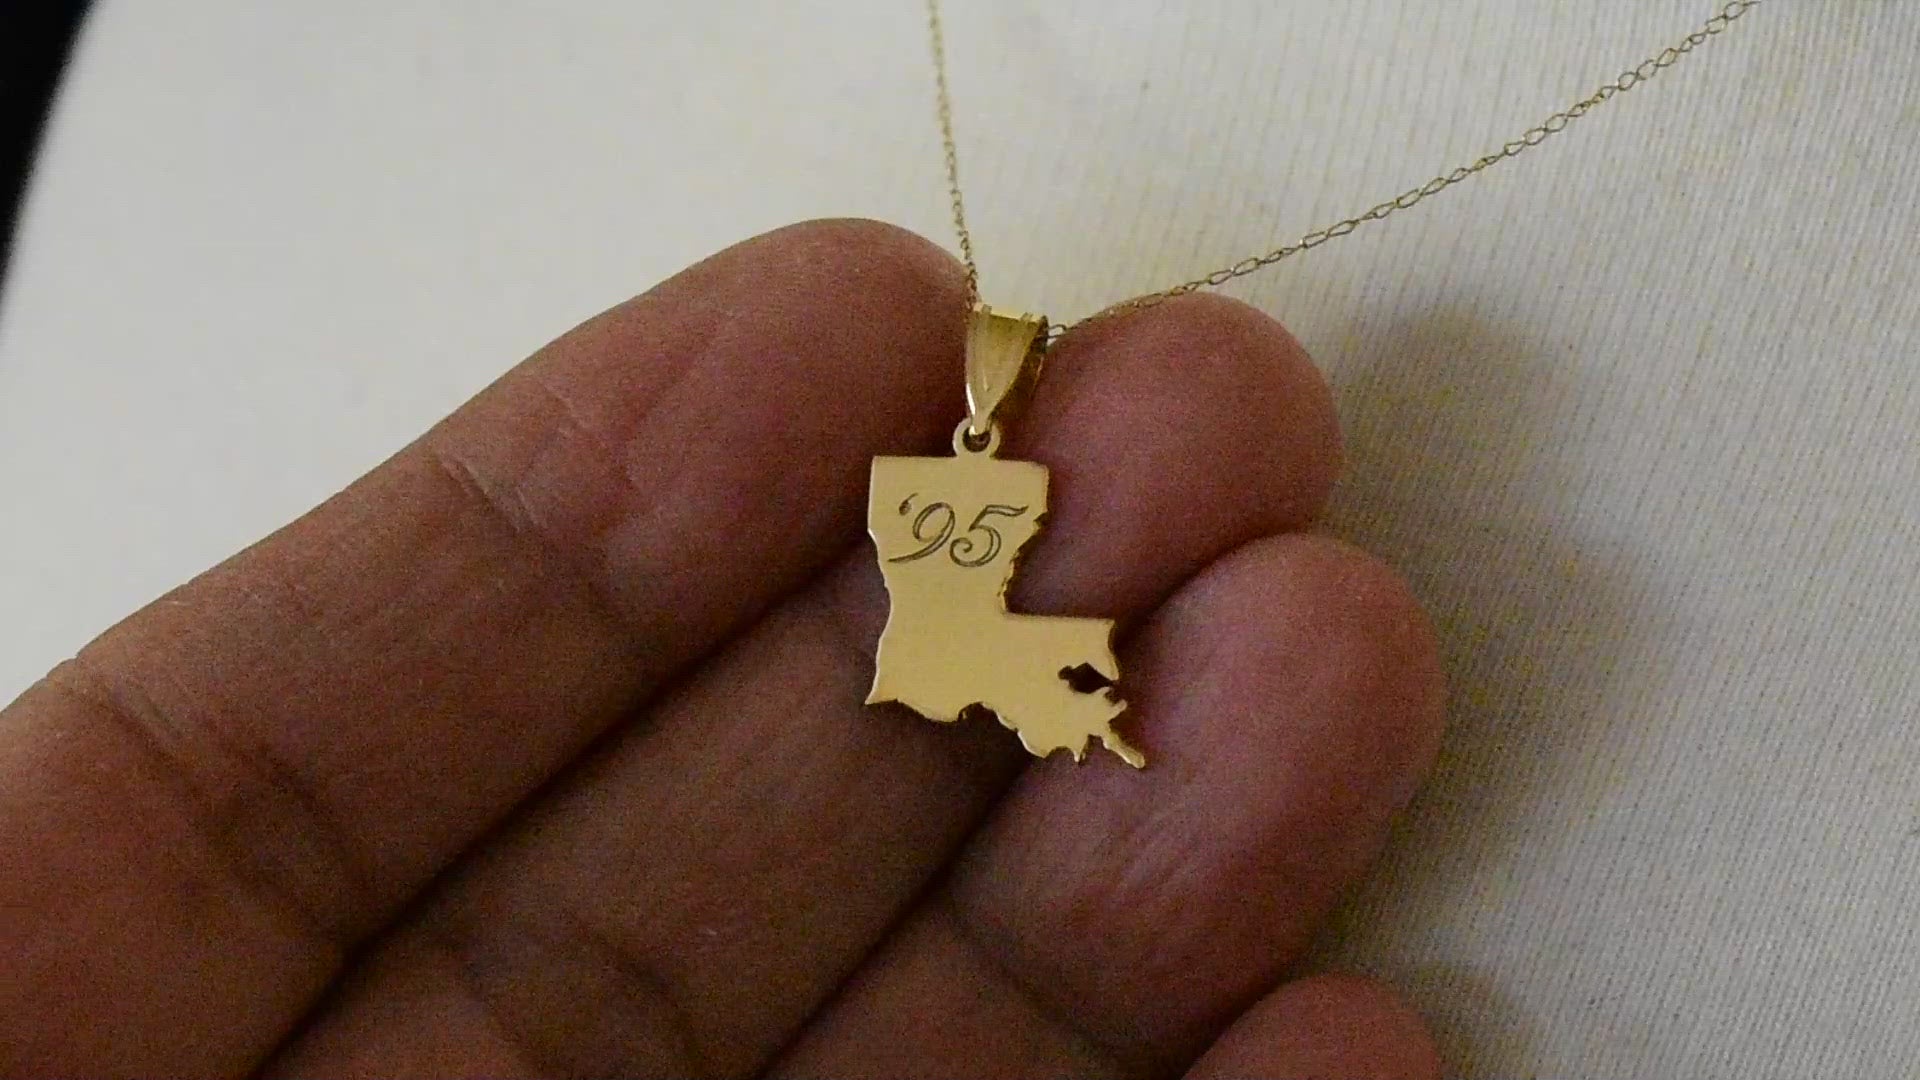 14K Gold or Sterling Silver Louisiana LA State Map Pendant Charm Personalized Monogram